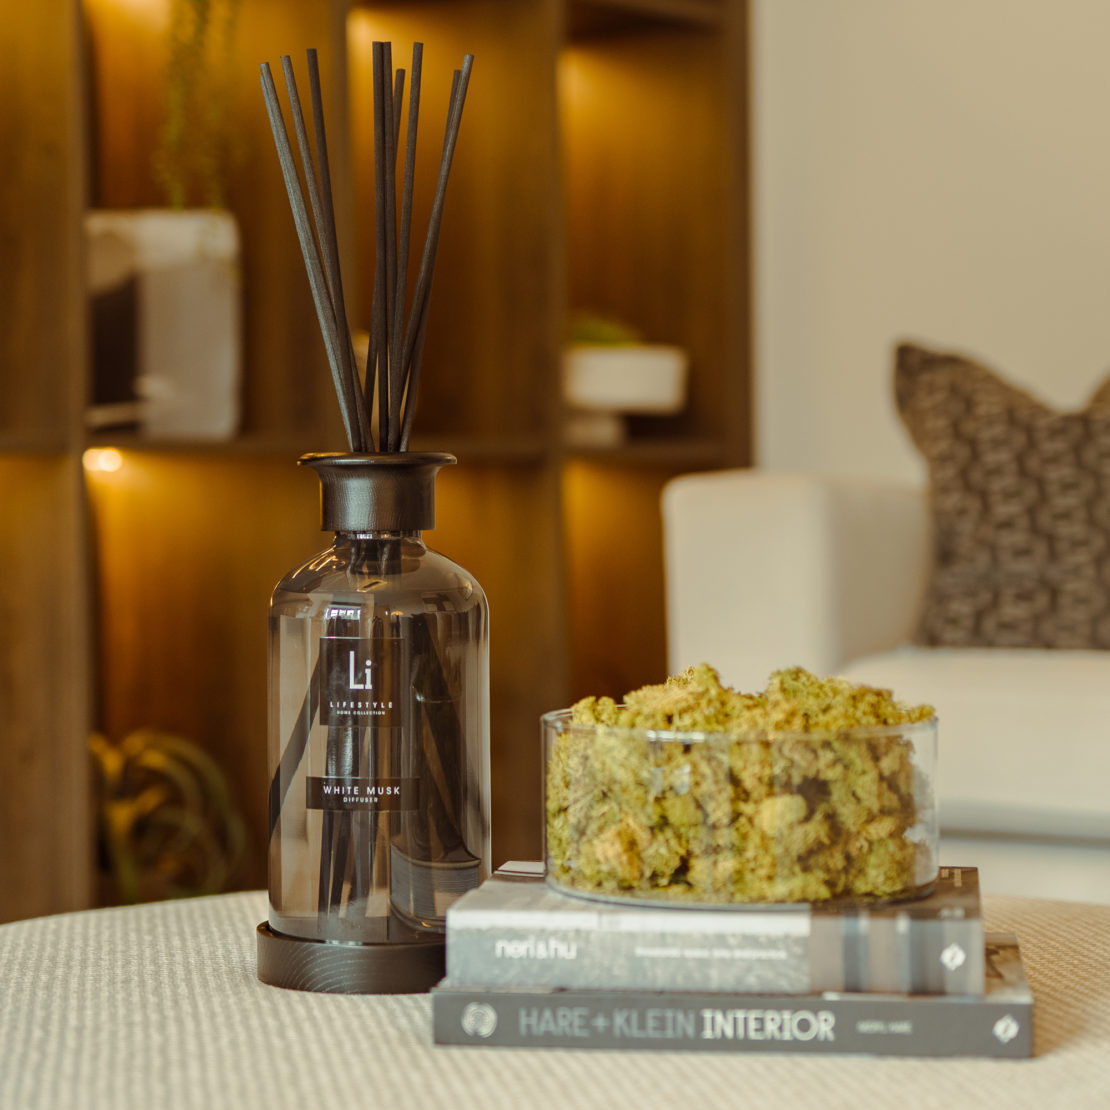 luxury home fragrance - white musk diffuser by juliettes interiors